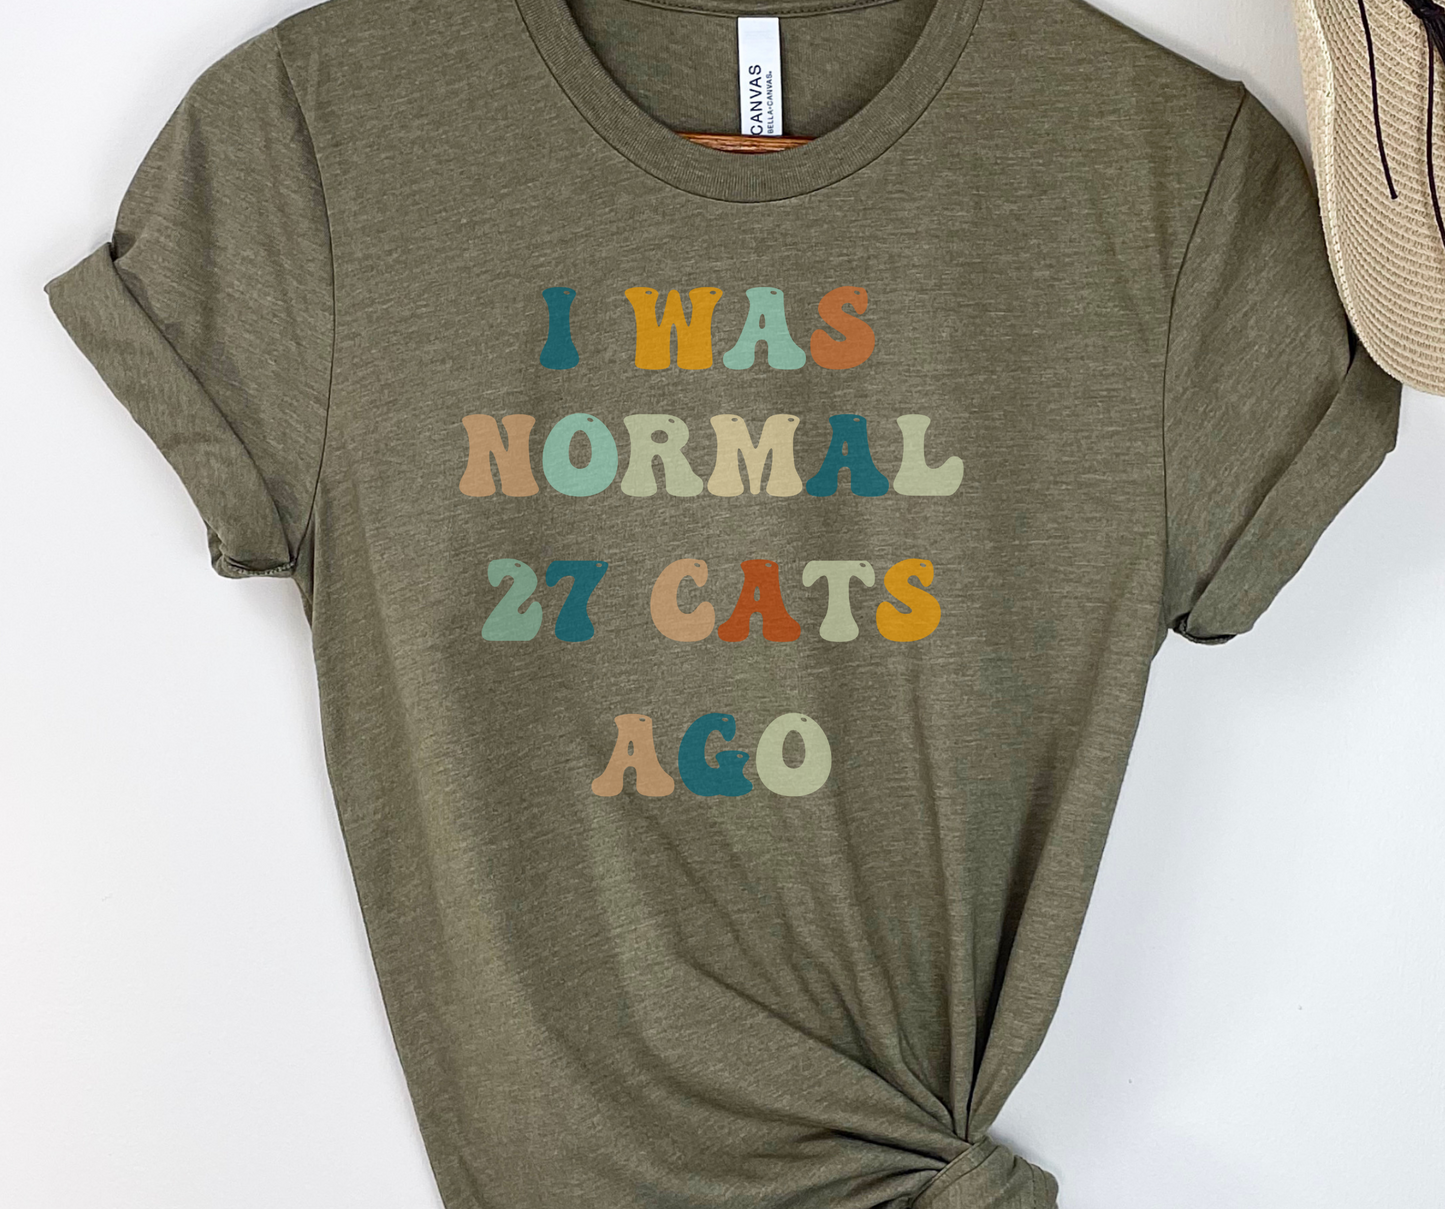 I Was Normal 27 Cats Ago Shirt